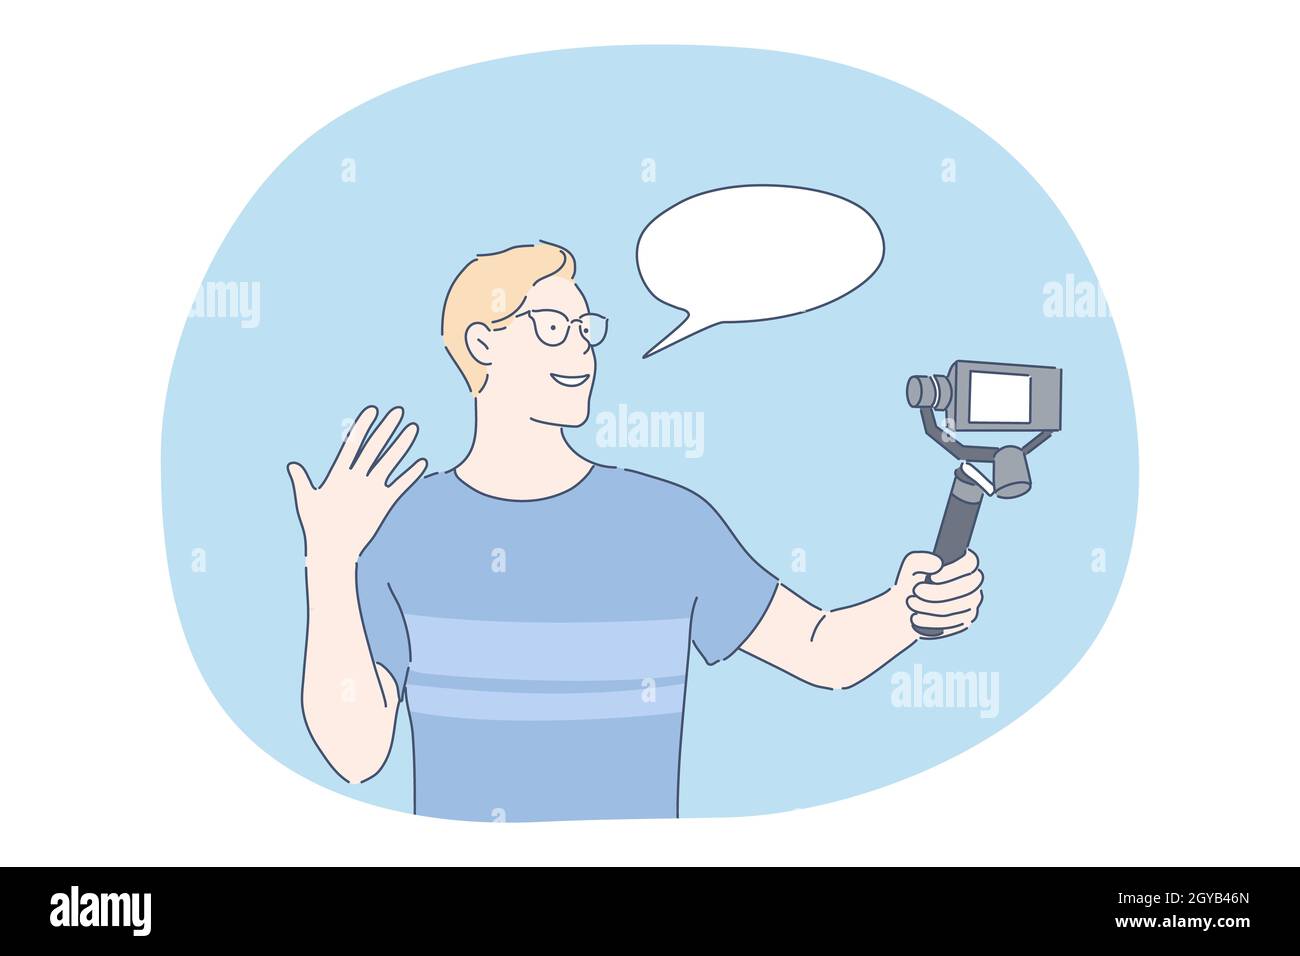 Blogging, blogging, sharing video content online concept. Teen boy cartoon character standing with smartphone camera on tripod and recording video for Stock Photo